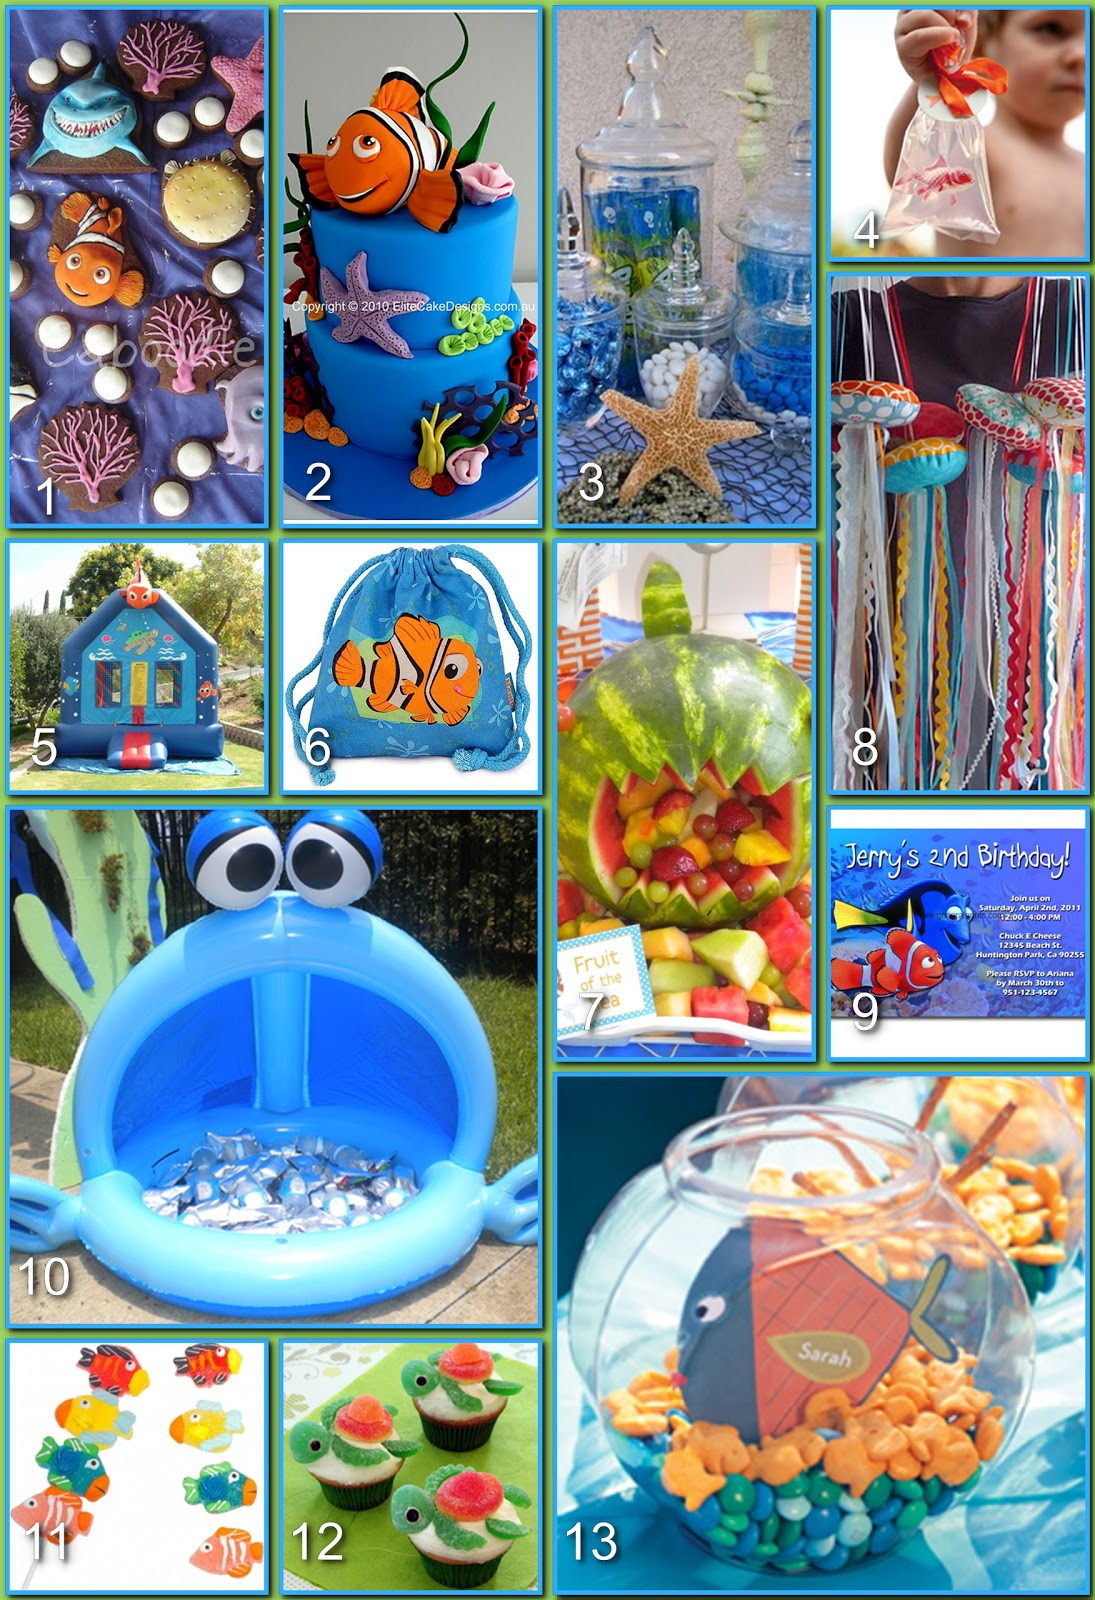 Finding Nemo Party Food Ideas
 Disney Donna Kay Disney Party Boards Finding Nemo Party